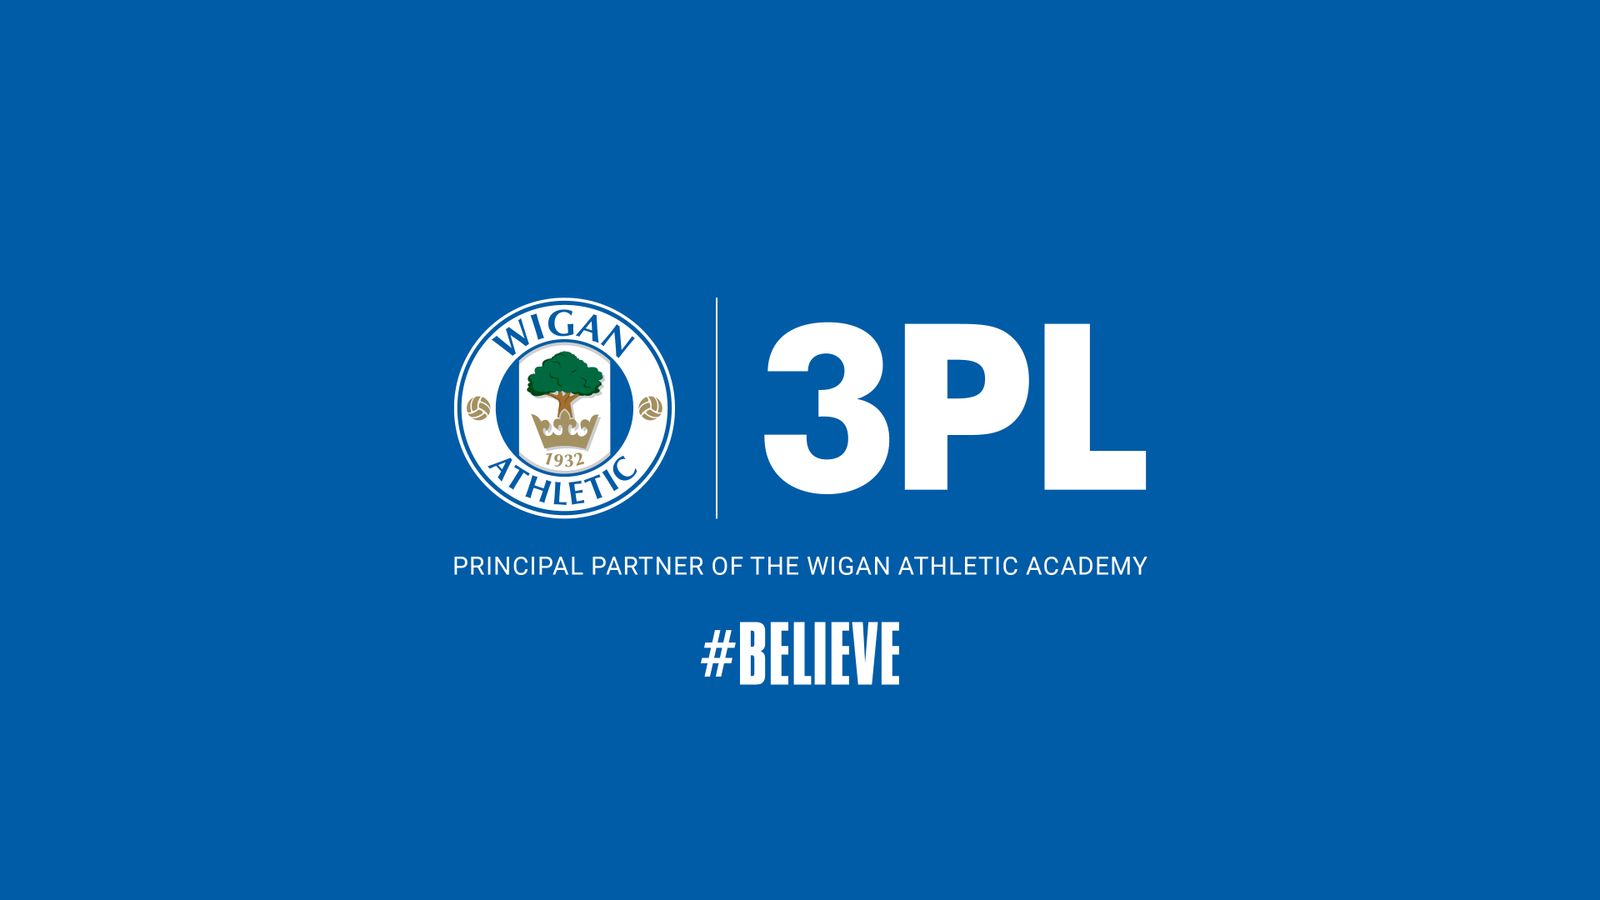 3PL are Proud Partner of The Wigan Athletic Academy